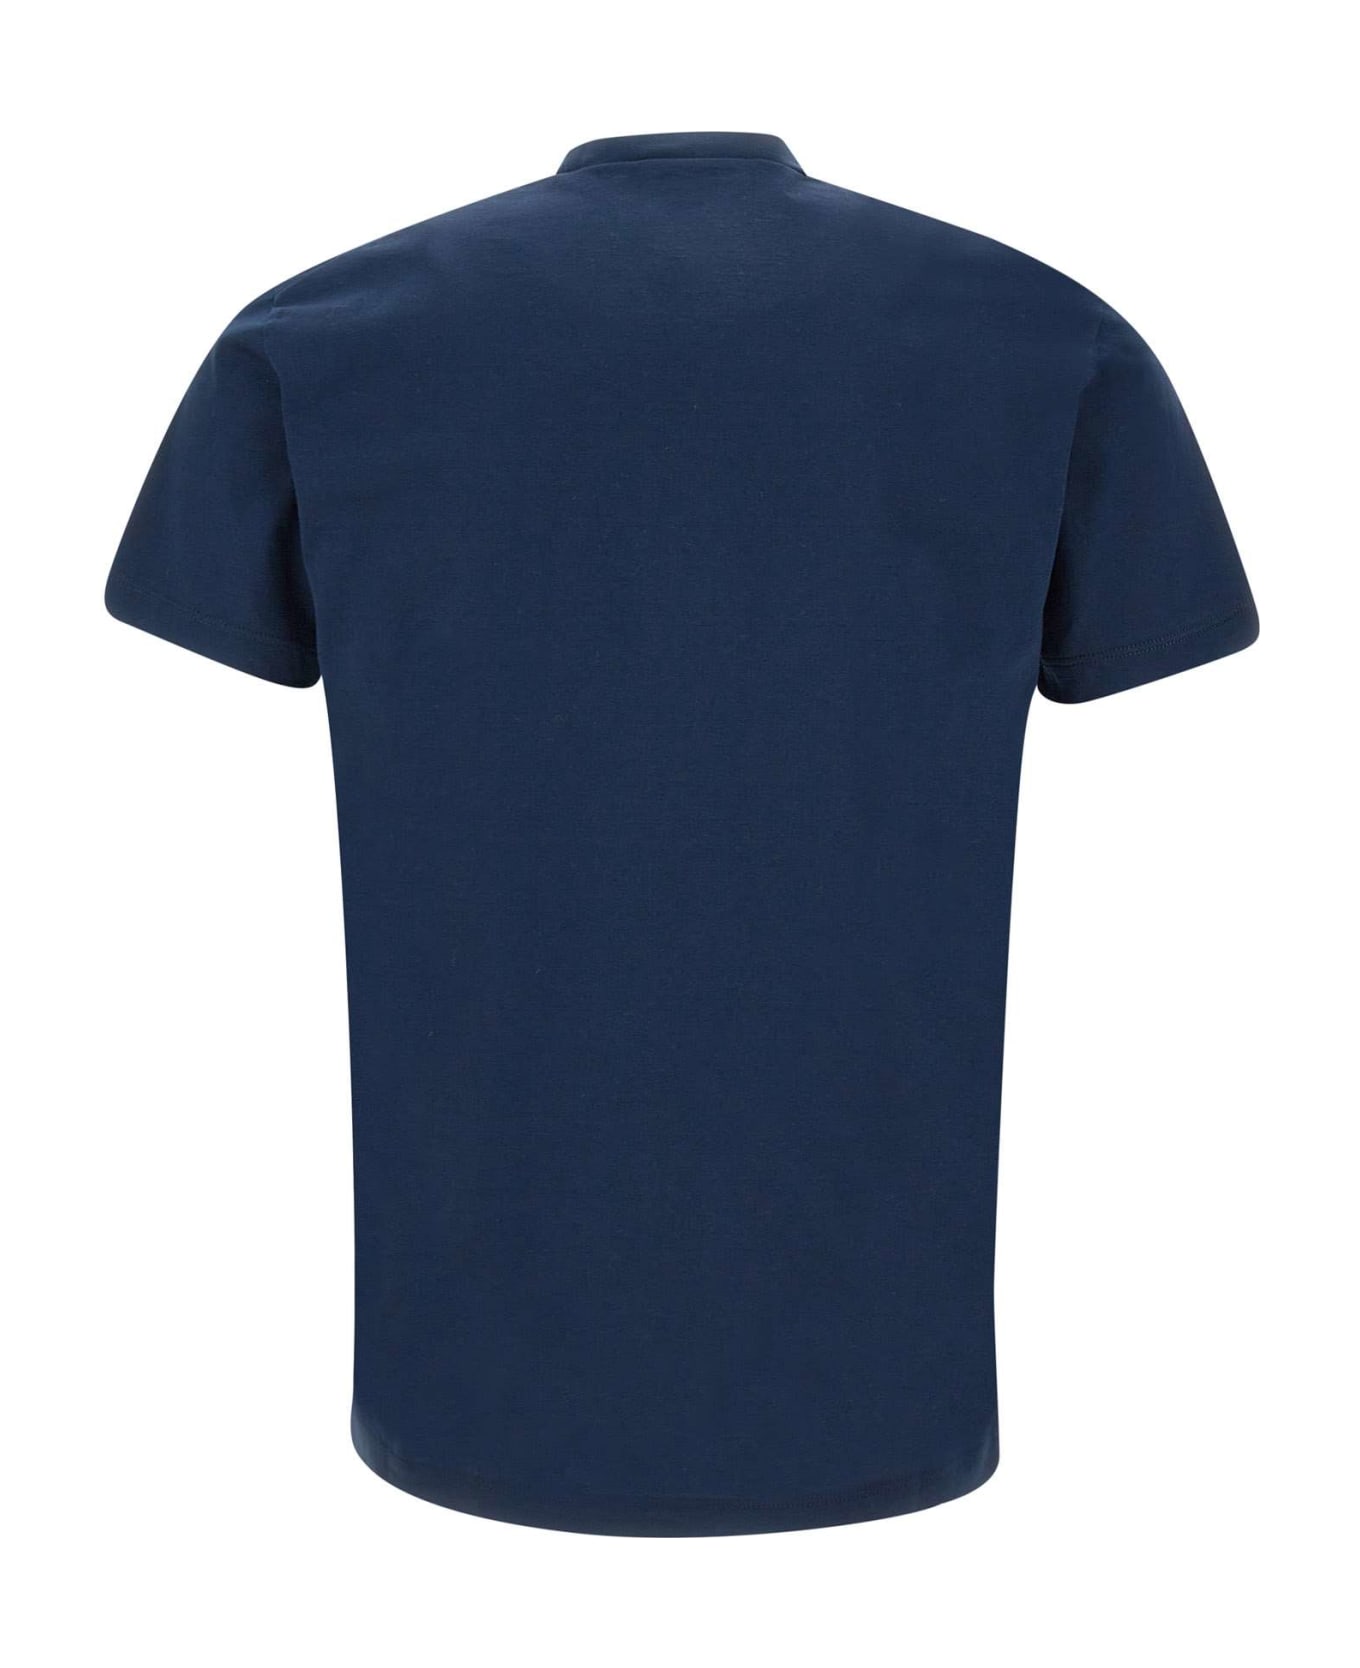 Dsquared2 'cool Fit Tee' Cotton T-shirt - BLUE